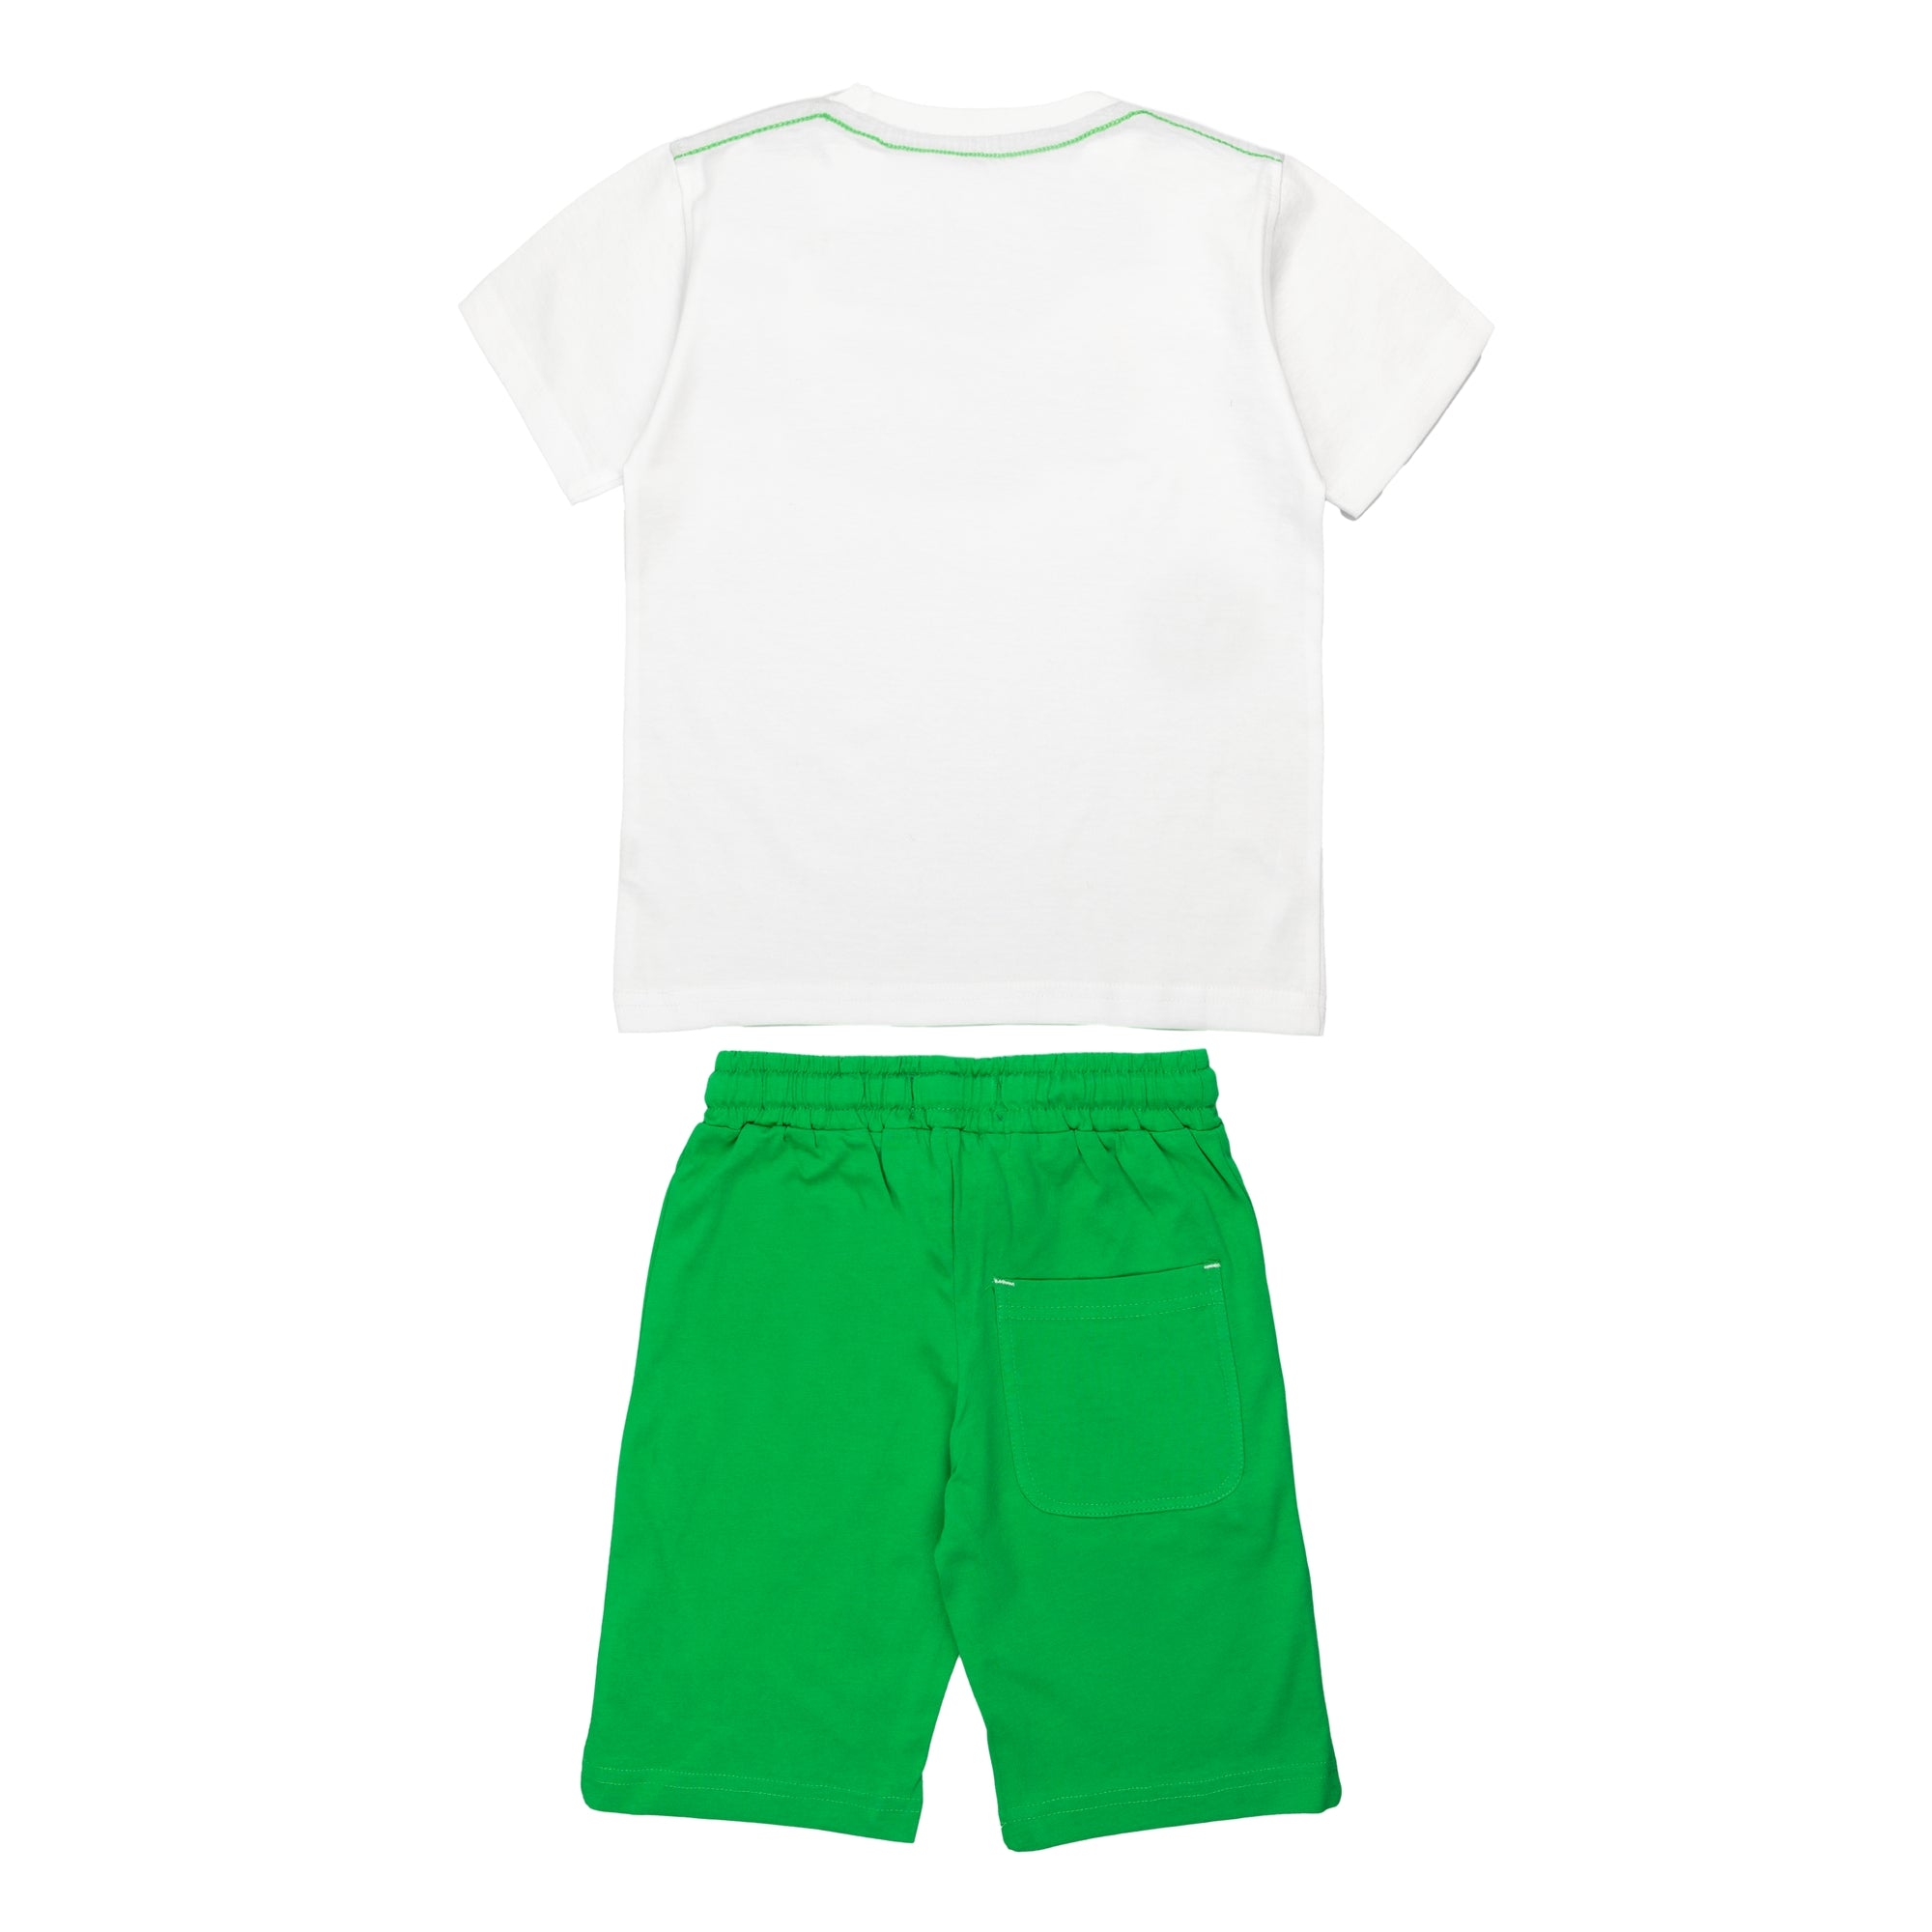 Jersey t-shirt and shorts set with windsurfing print